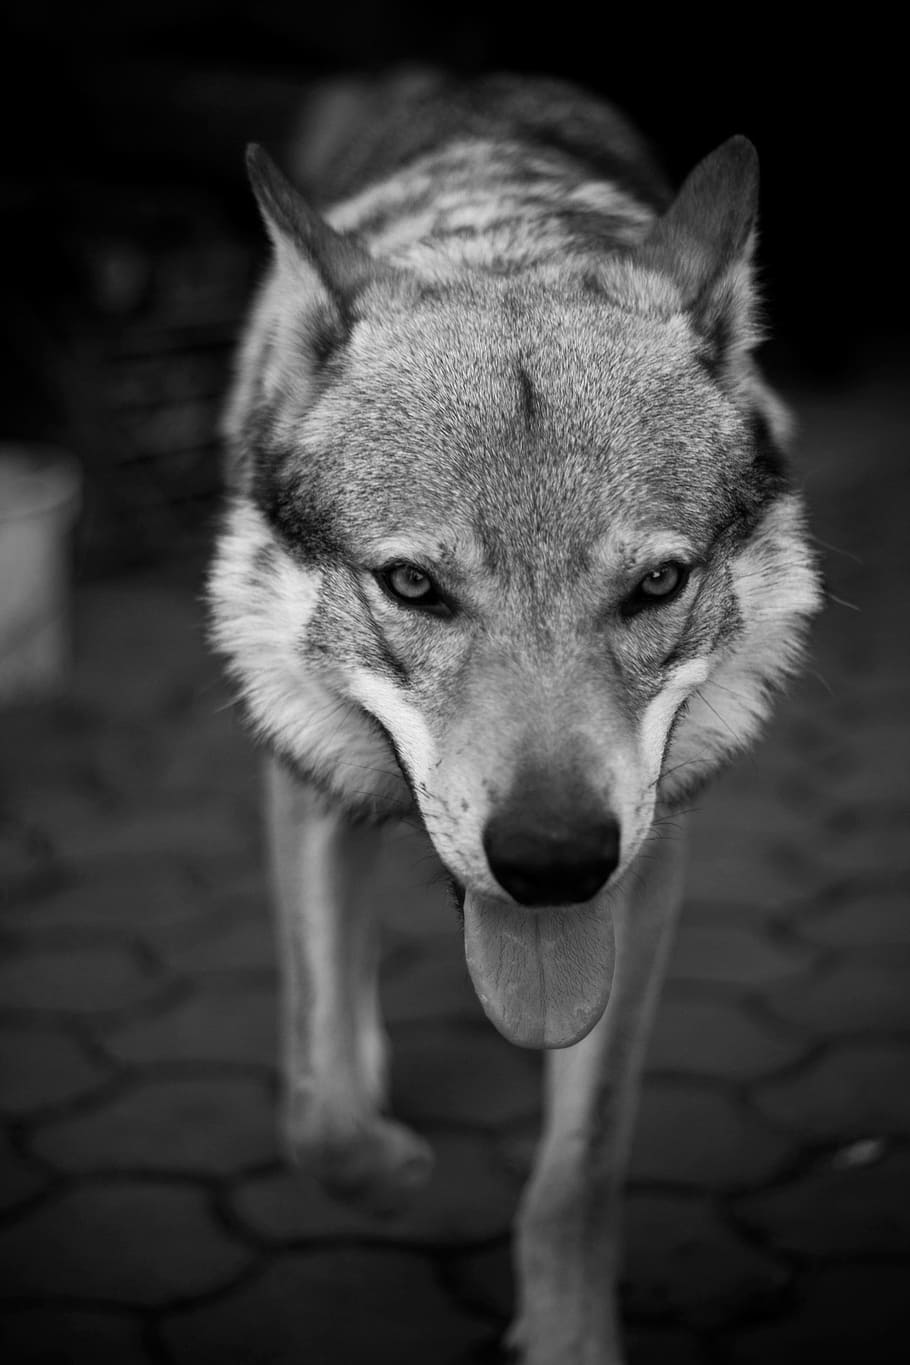 grayscale photography, wolf, dog, pet, big, animal, scary, cat, black and white, face